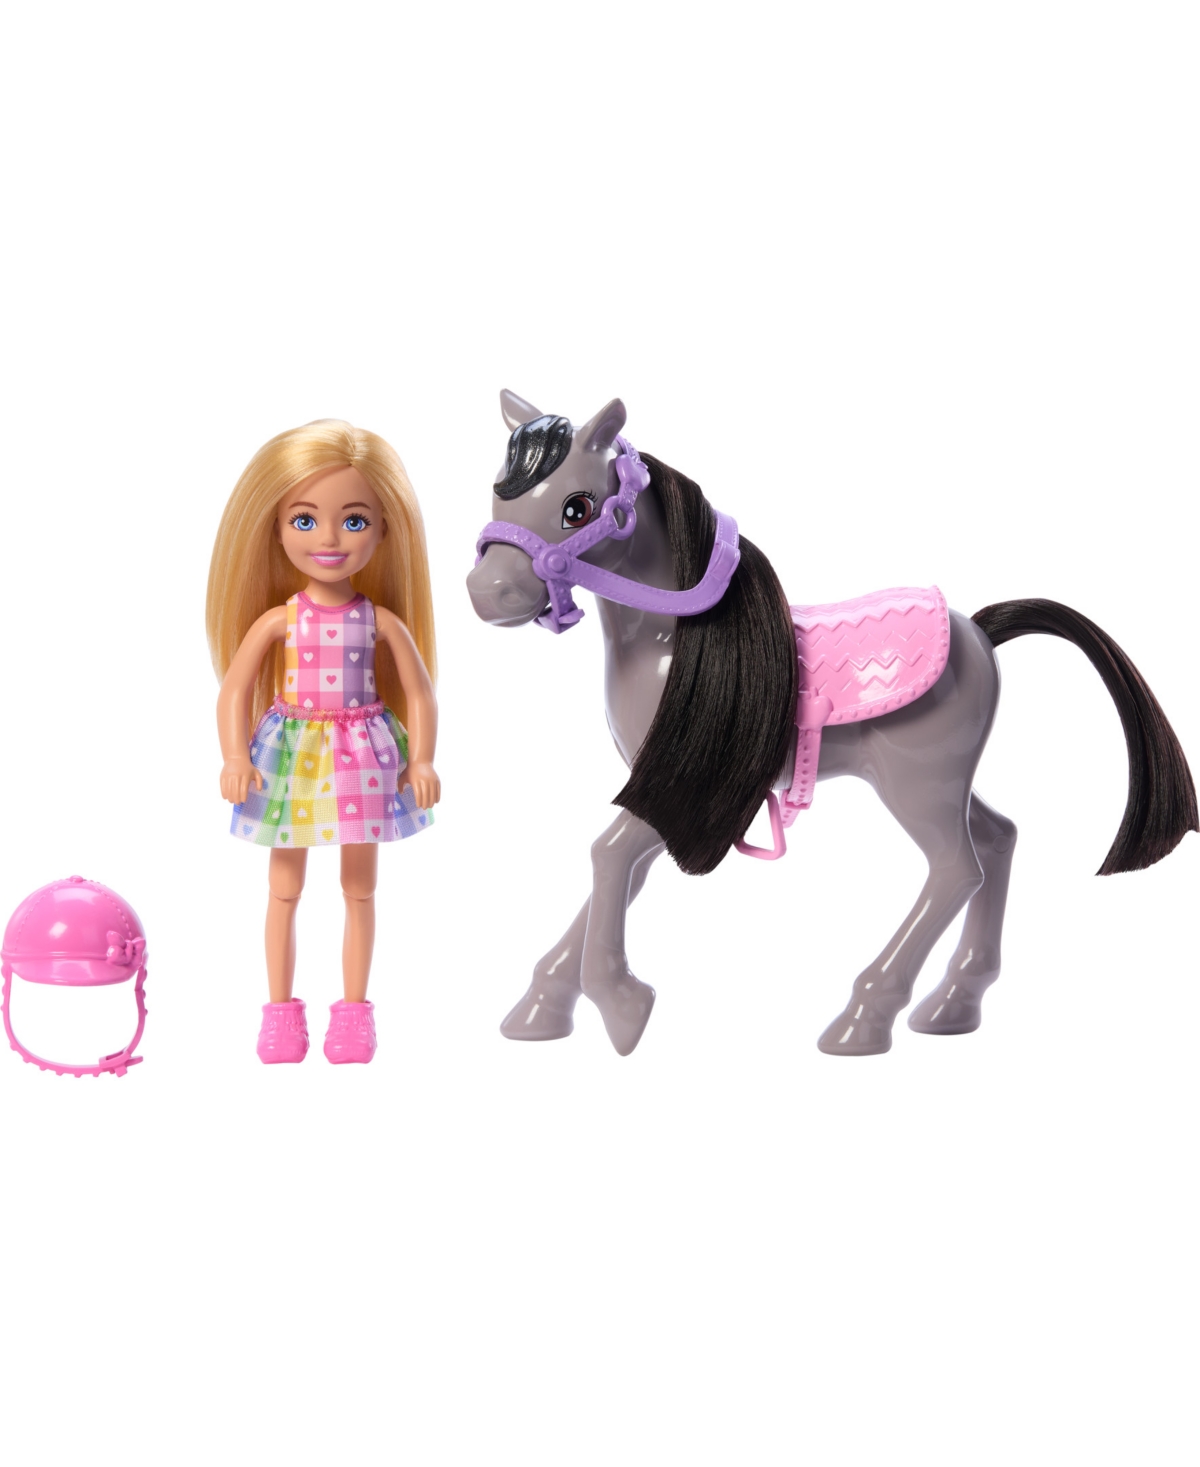 Shop Barbie Chelsea Doll And Horse Toy Set, Includes Helmet Accessory, Doll Bends At Knees To "ride" Pony In Multi